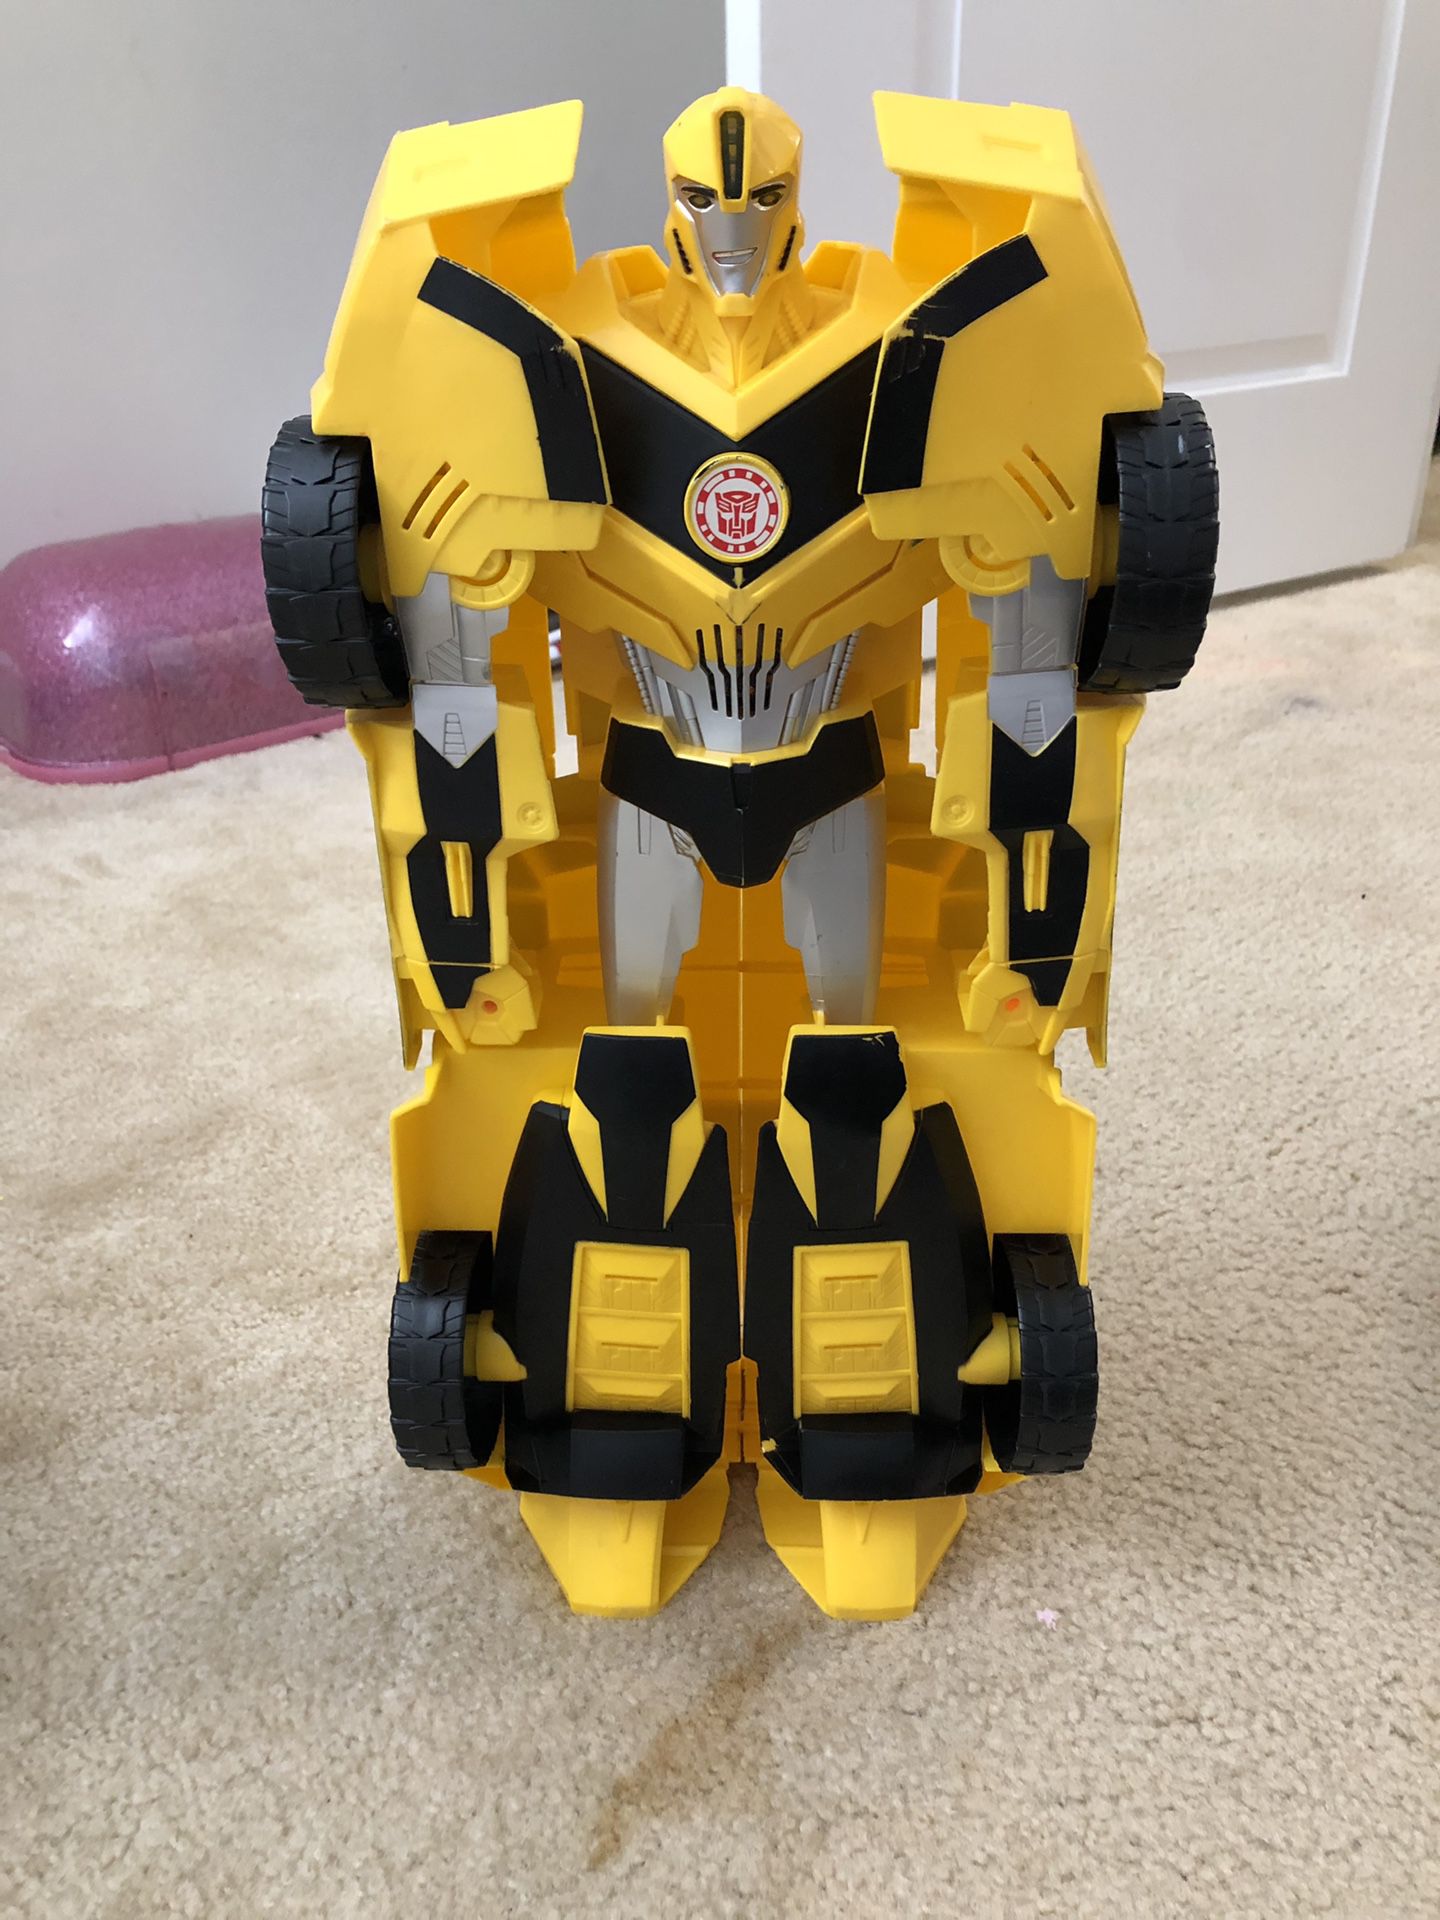 Transformers Bumblebee Large Toy Car with lights and sound